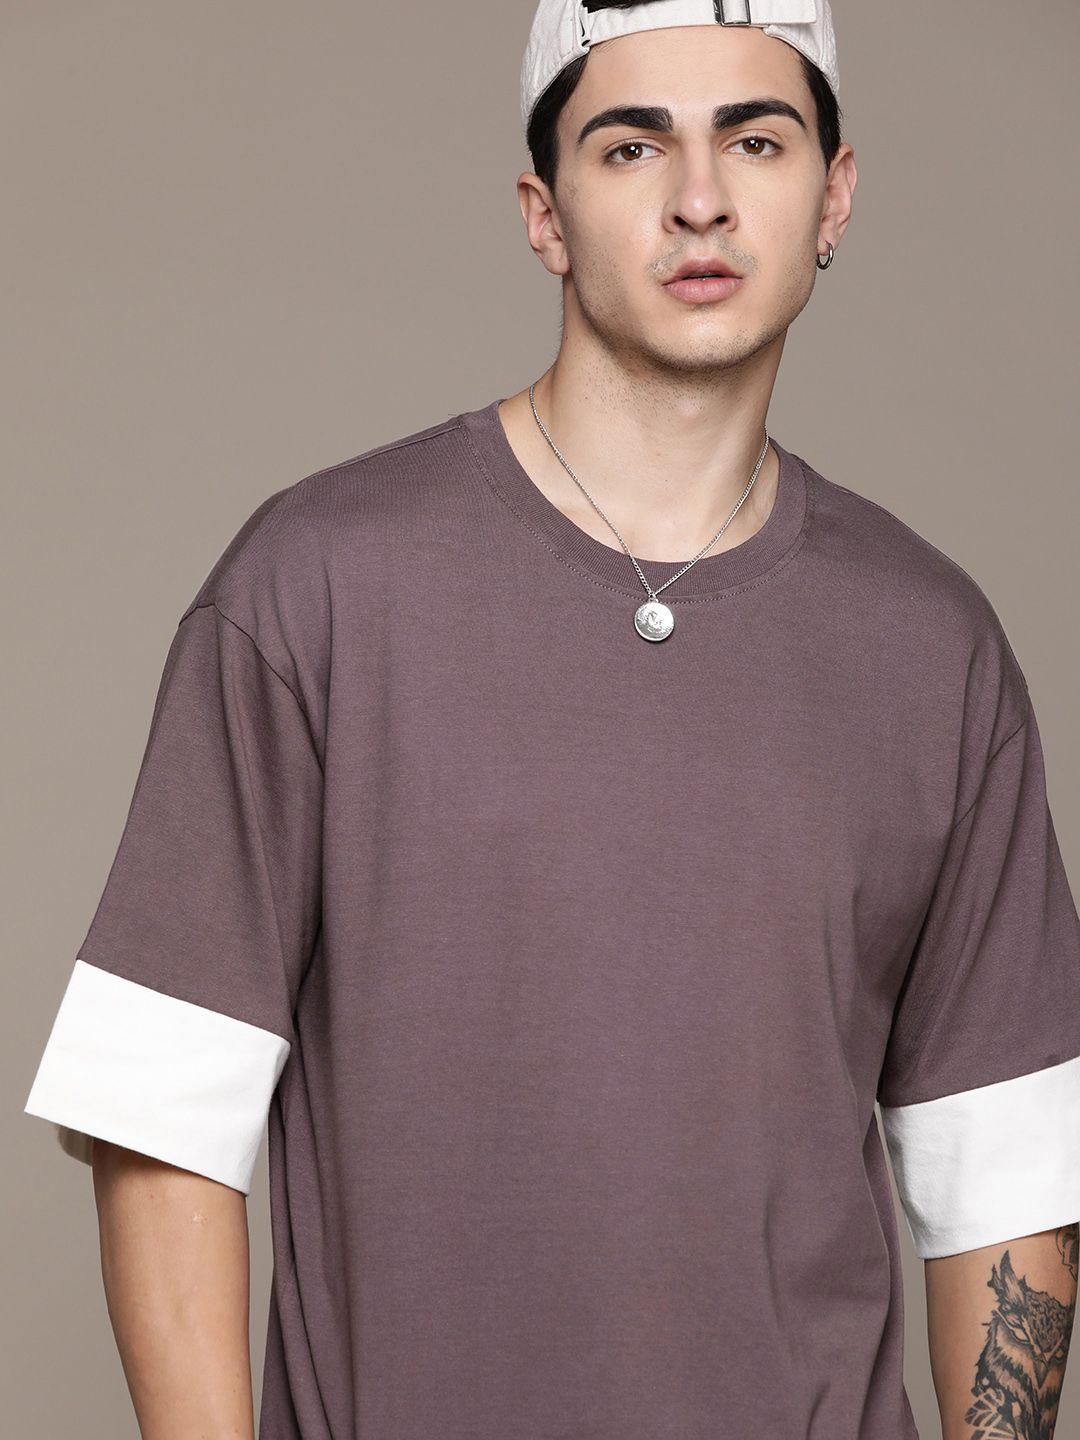 the roadster lifestyle co. pure cotton oversized t-shirt